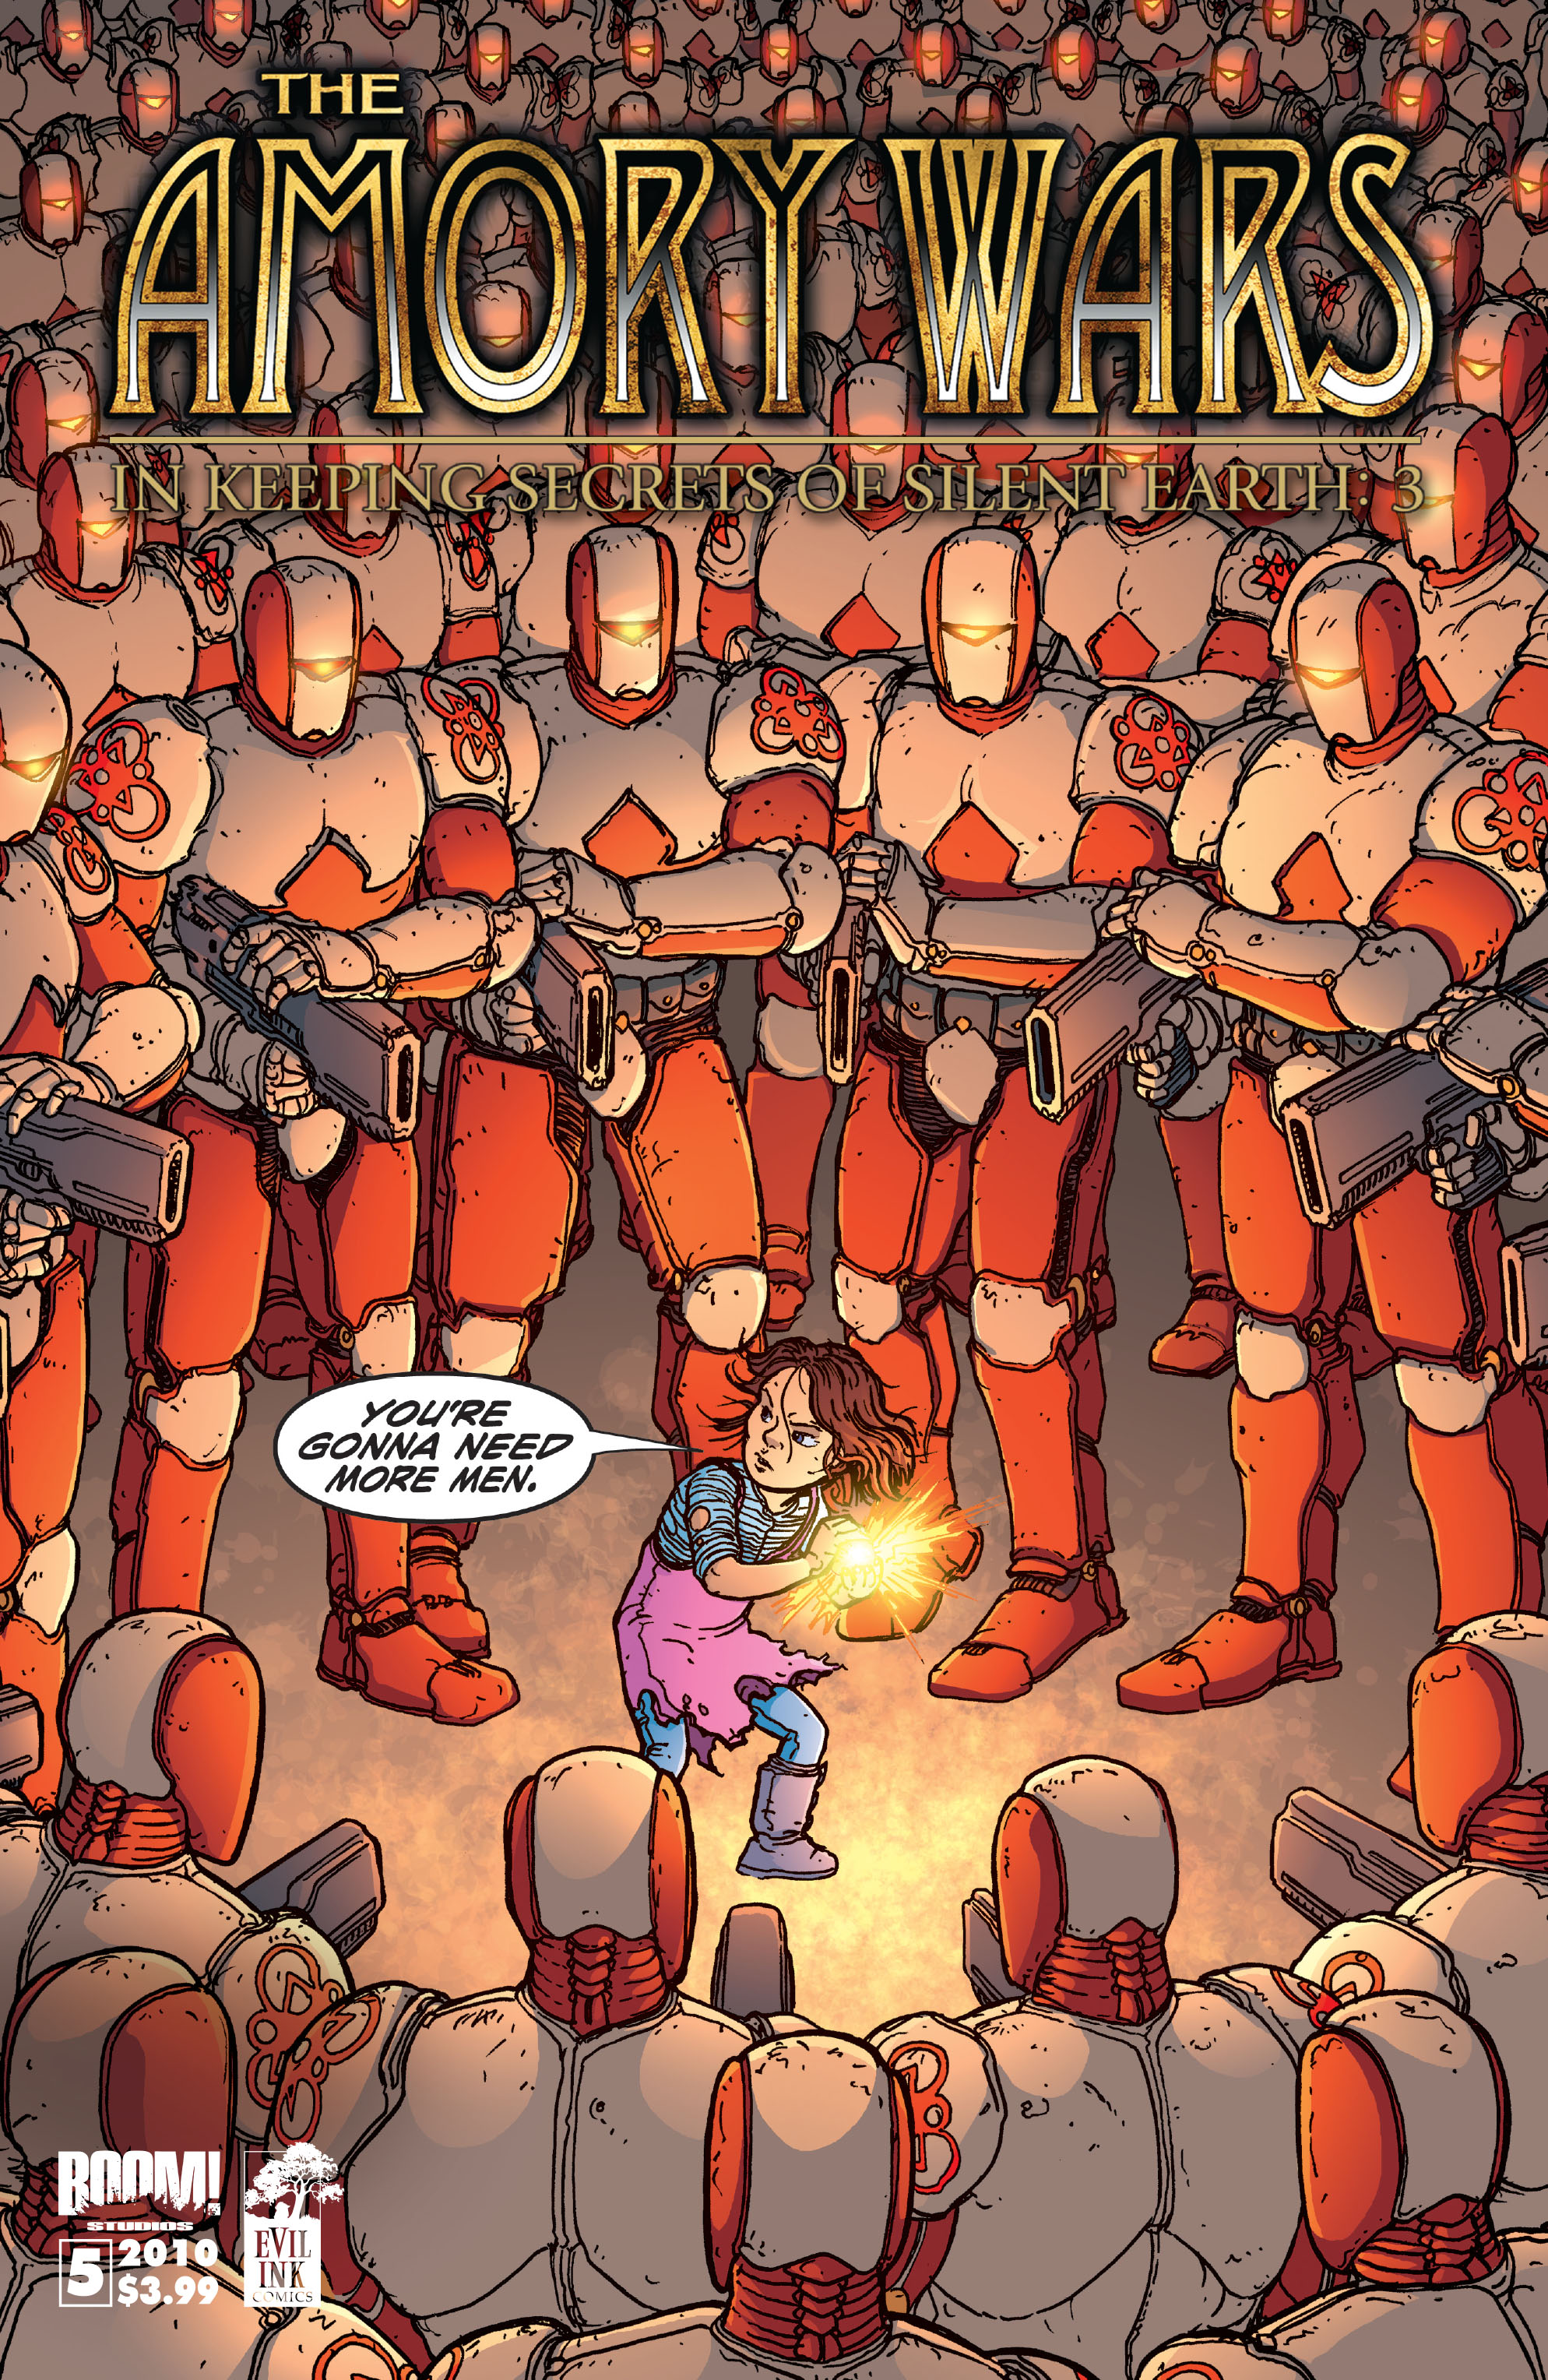 Read online The Amory Wars: In Keeping Secrets of Silent Earth 3 comic -  Issue #5 - 1